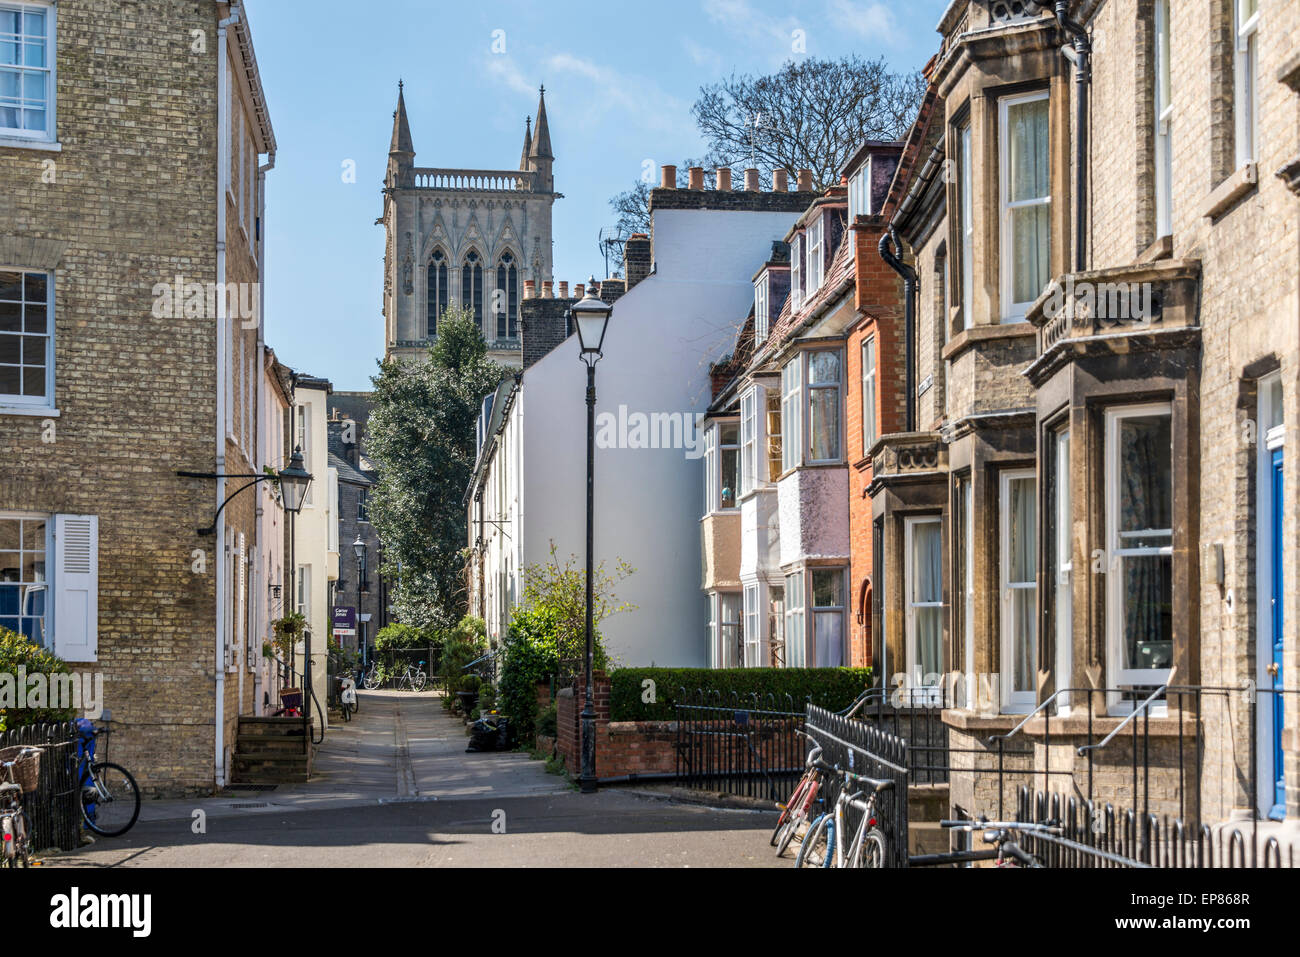 Views down Portugal Street to the tower of the chapel of St John's College of Cambridge University Stock Photo